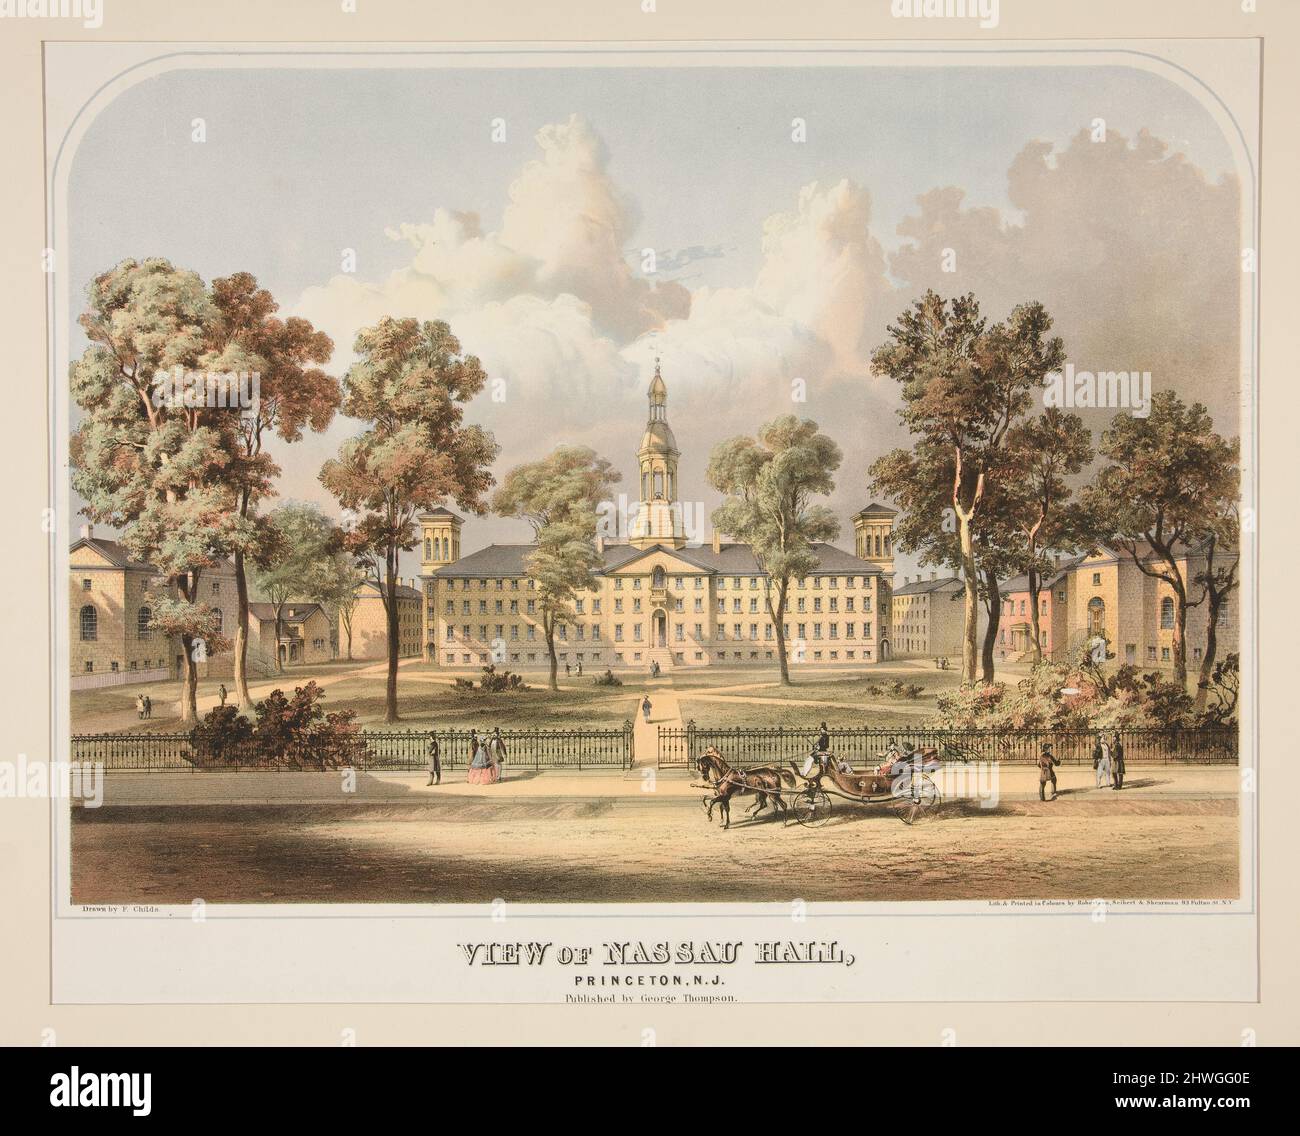 View of Nassau Hall, Princeton, N.J.. Lithographer: Unknown After: F. Childs, American, op. 1860Printer: Robertson, Seibert & Shearman, American, active mid-19th centuryPublisher: George Thompson, New York, 19th century Stock Photo